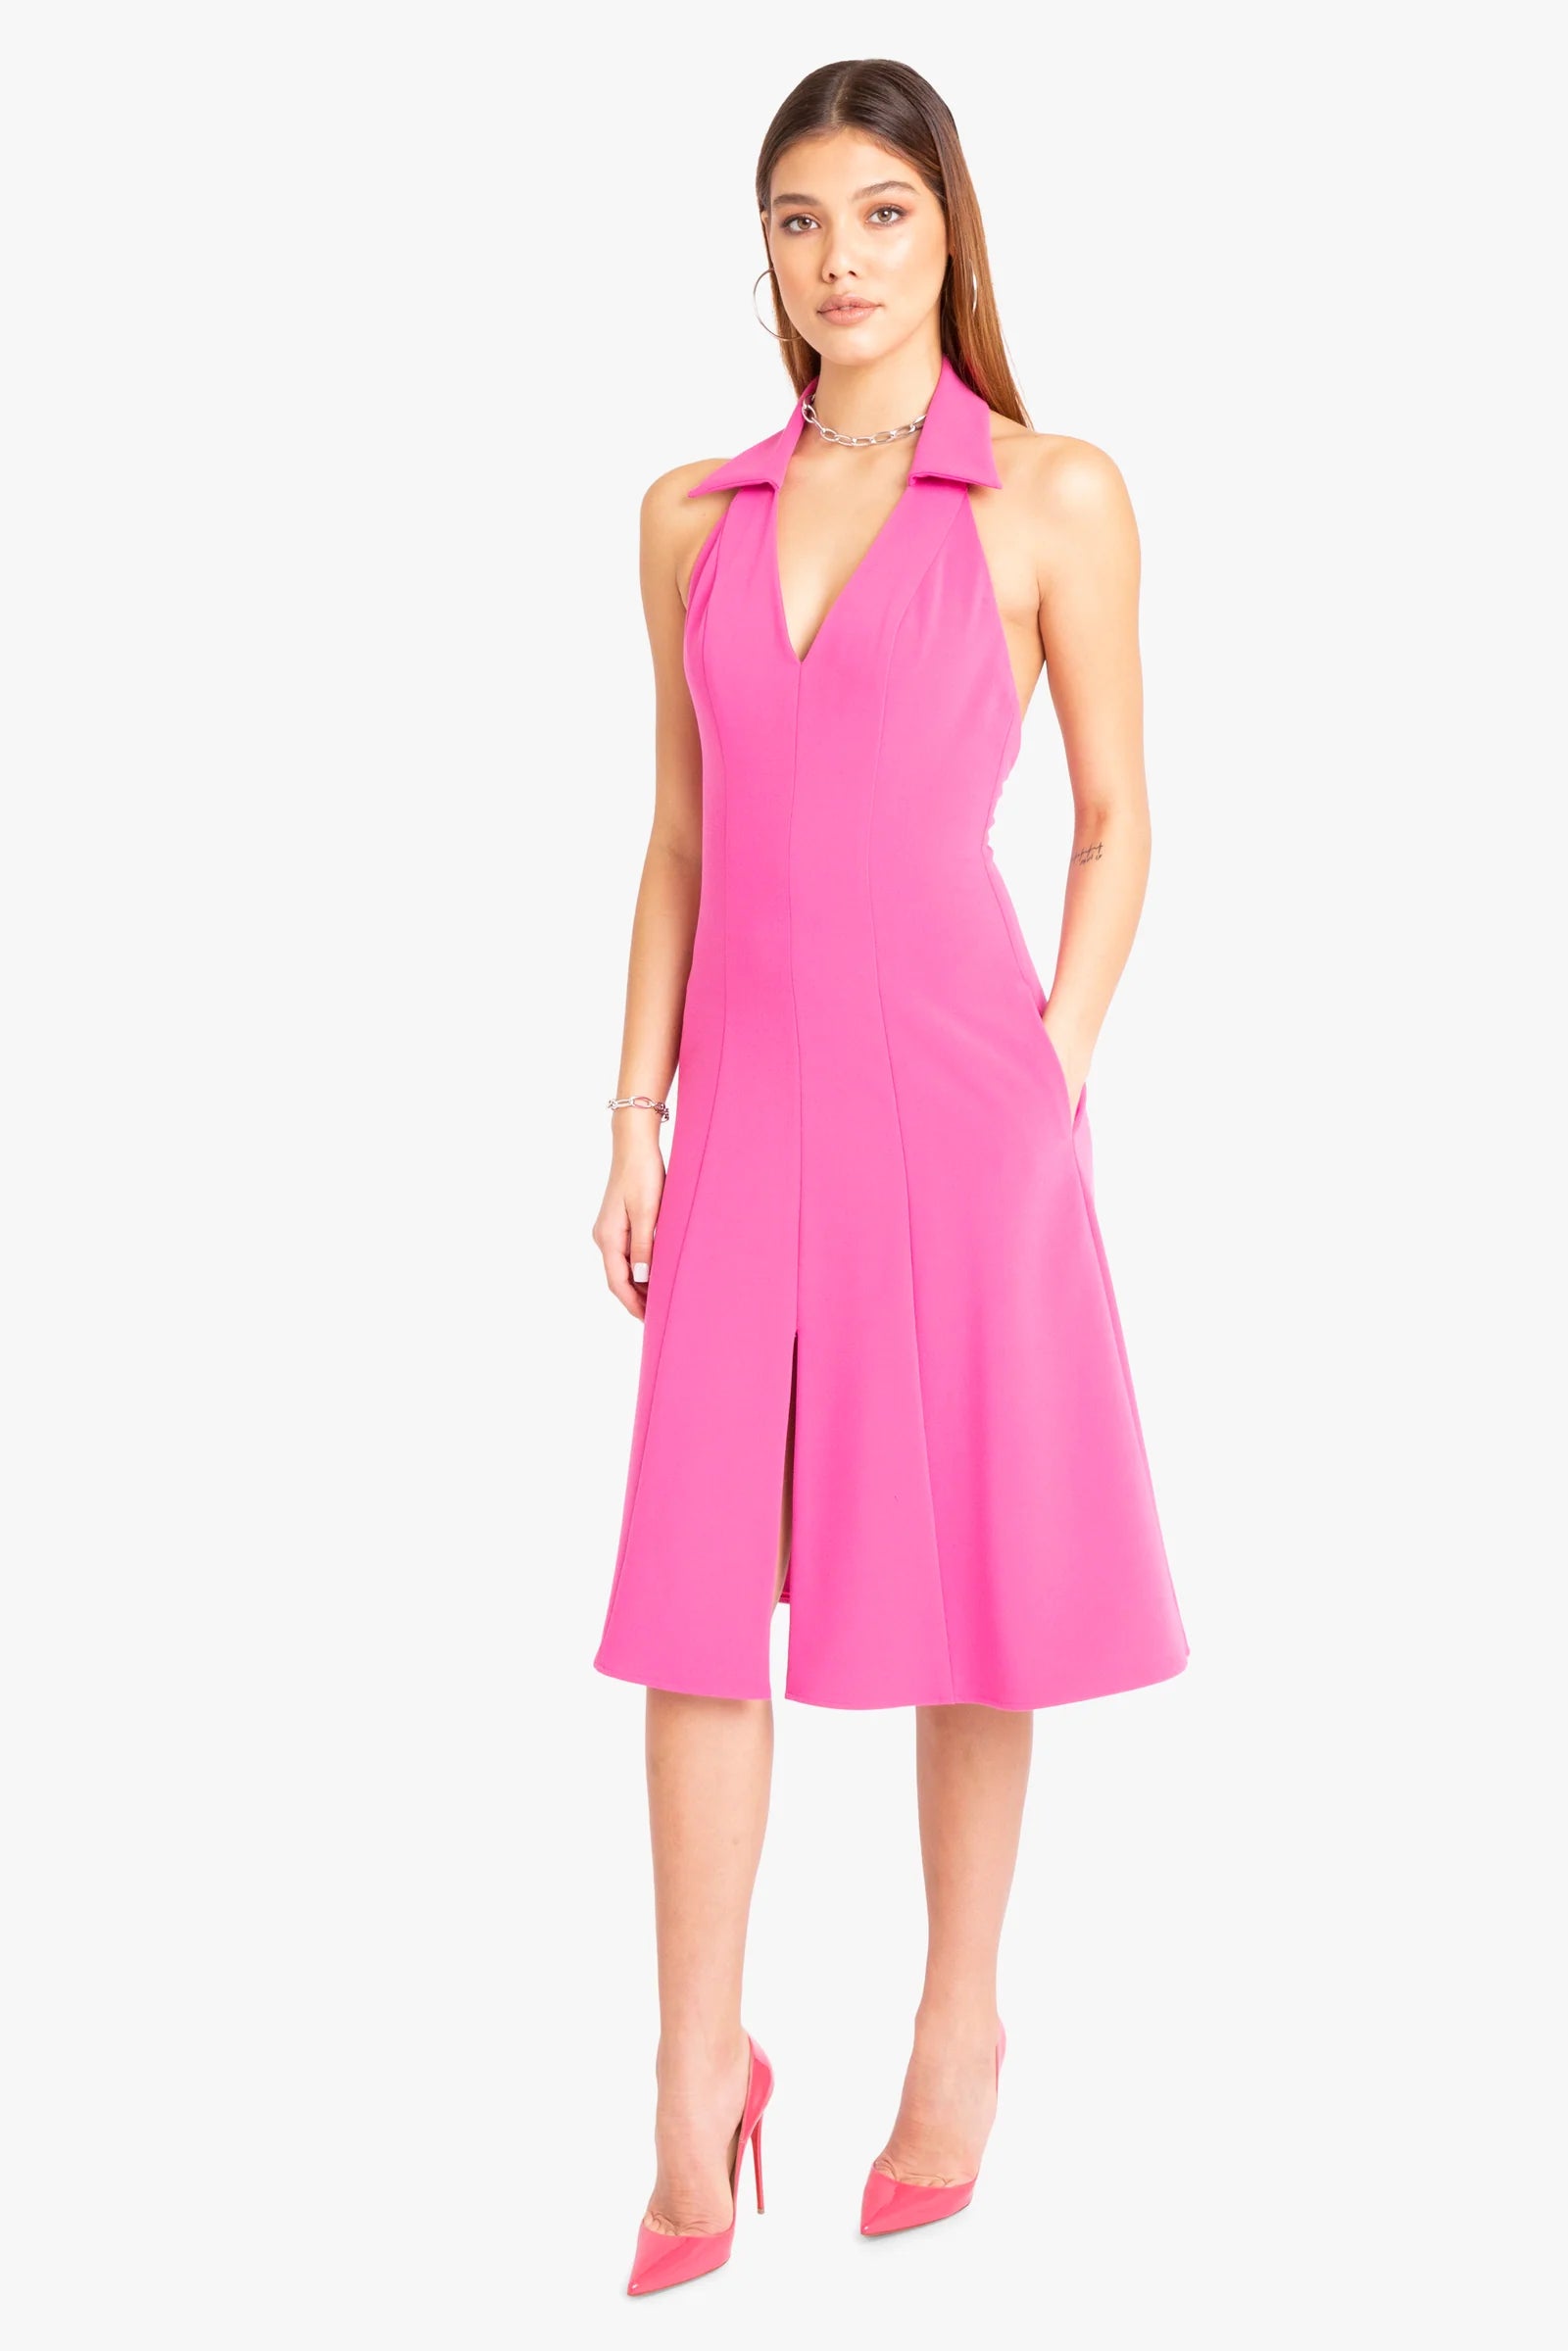 Lathan Dress in Pink by Black Halo